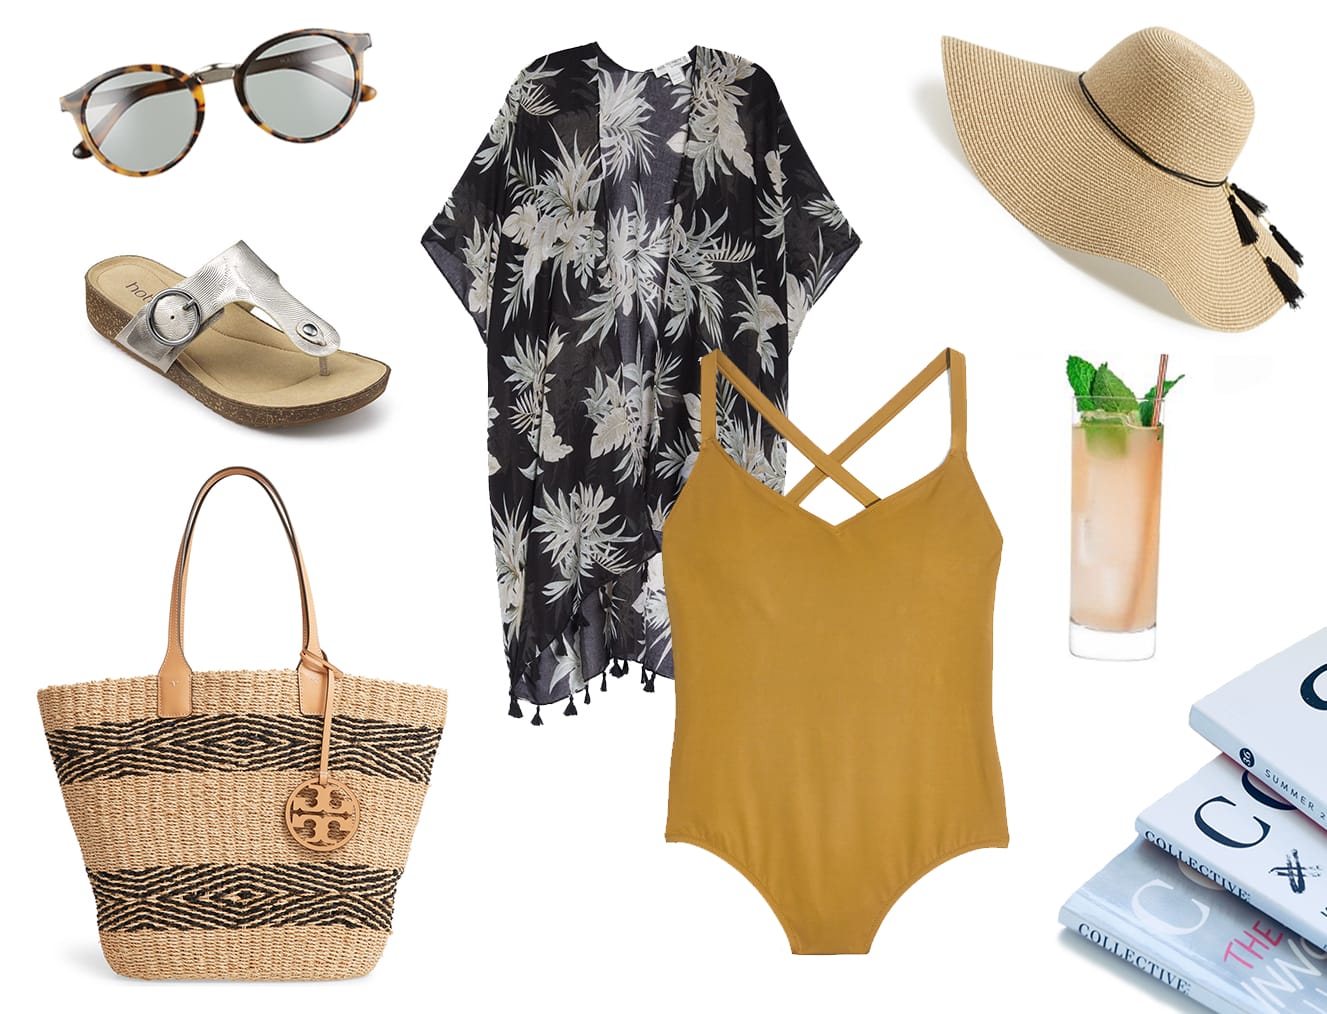 Get Resort Ready, top resort wear looks for 2019 | What To Wear on Vacation